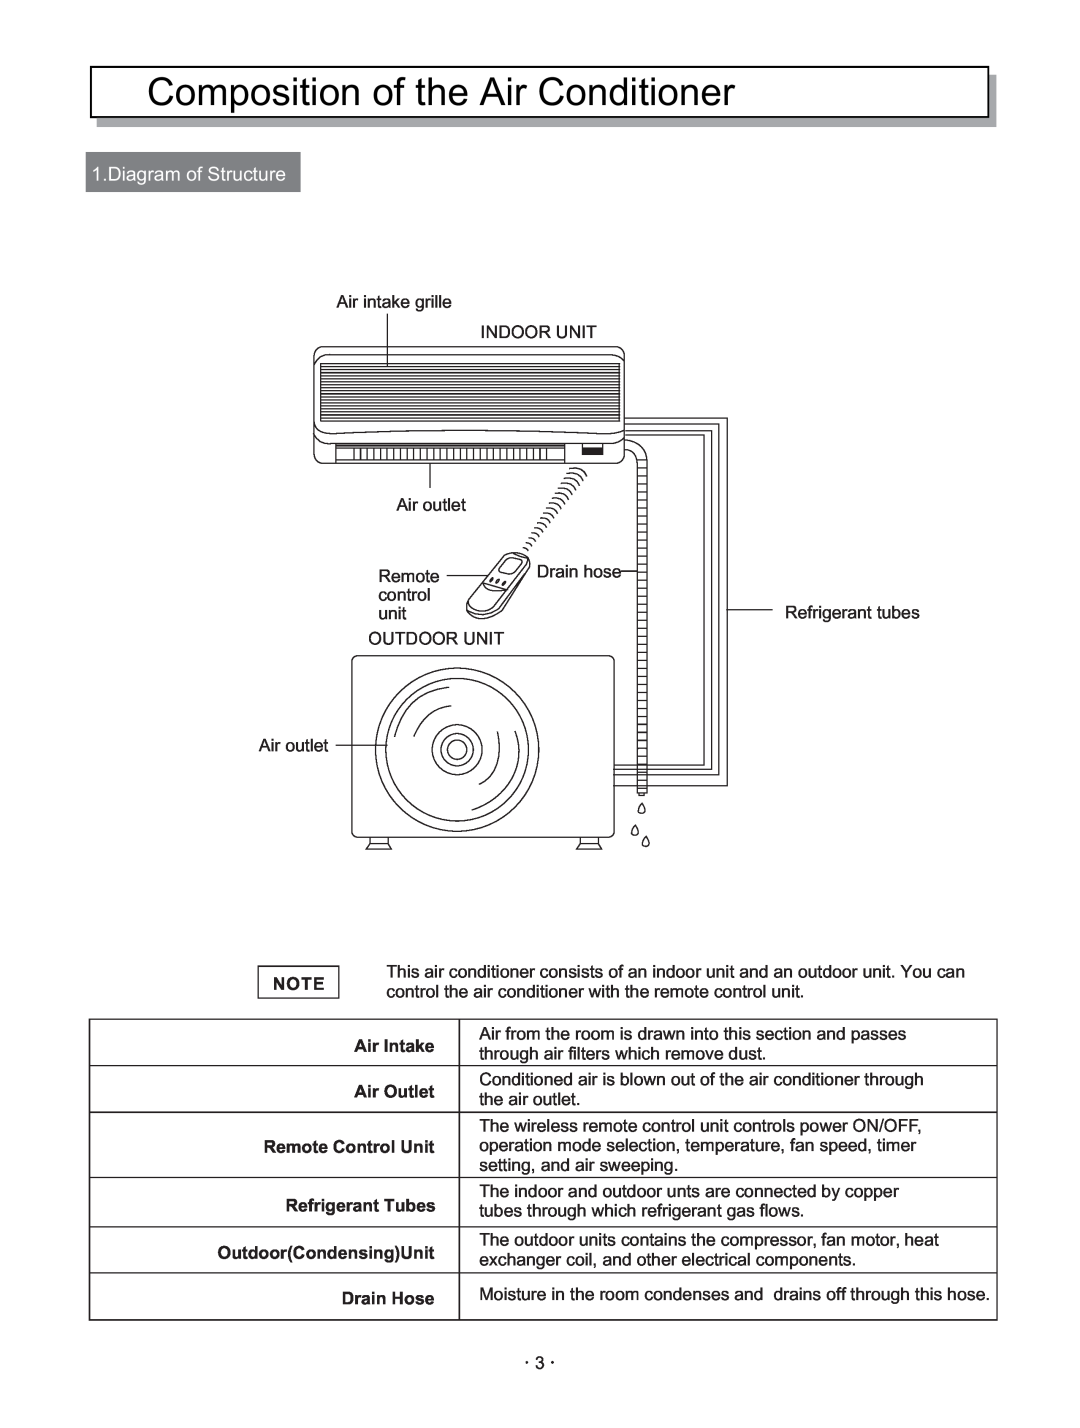 Hisense Group KF 346GWE instruction manual Composition of the Air Conditioner, Diagram of Structure 